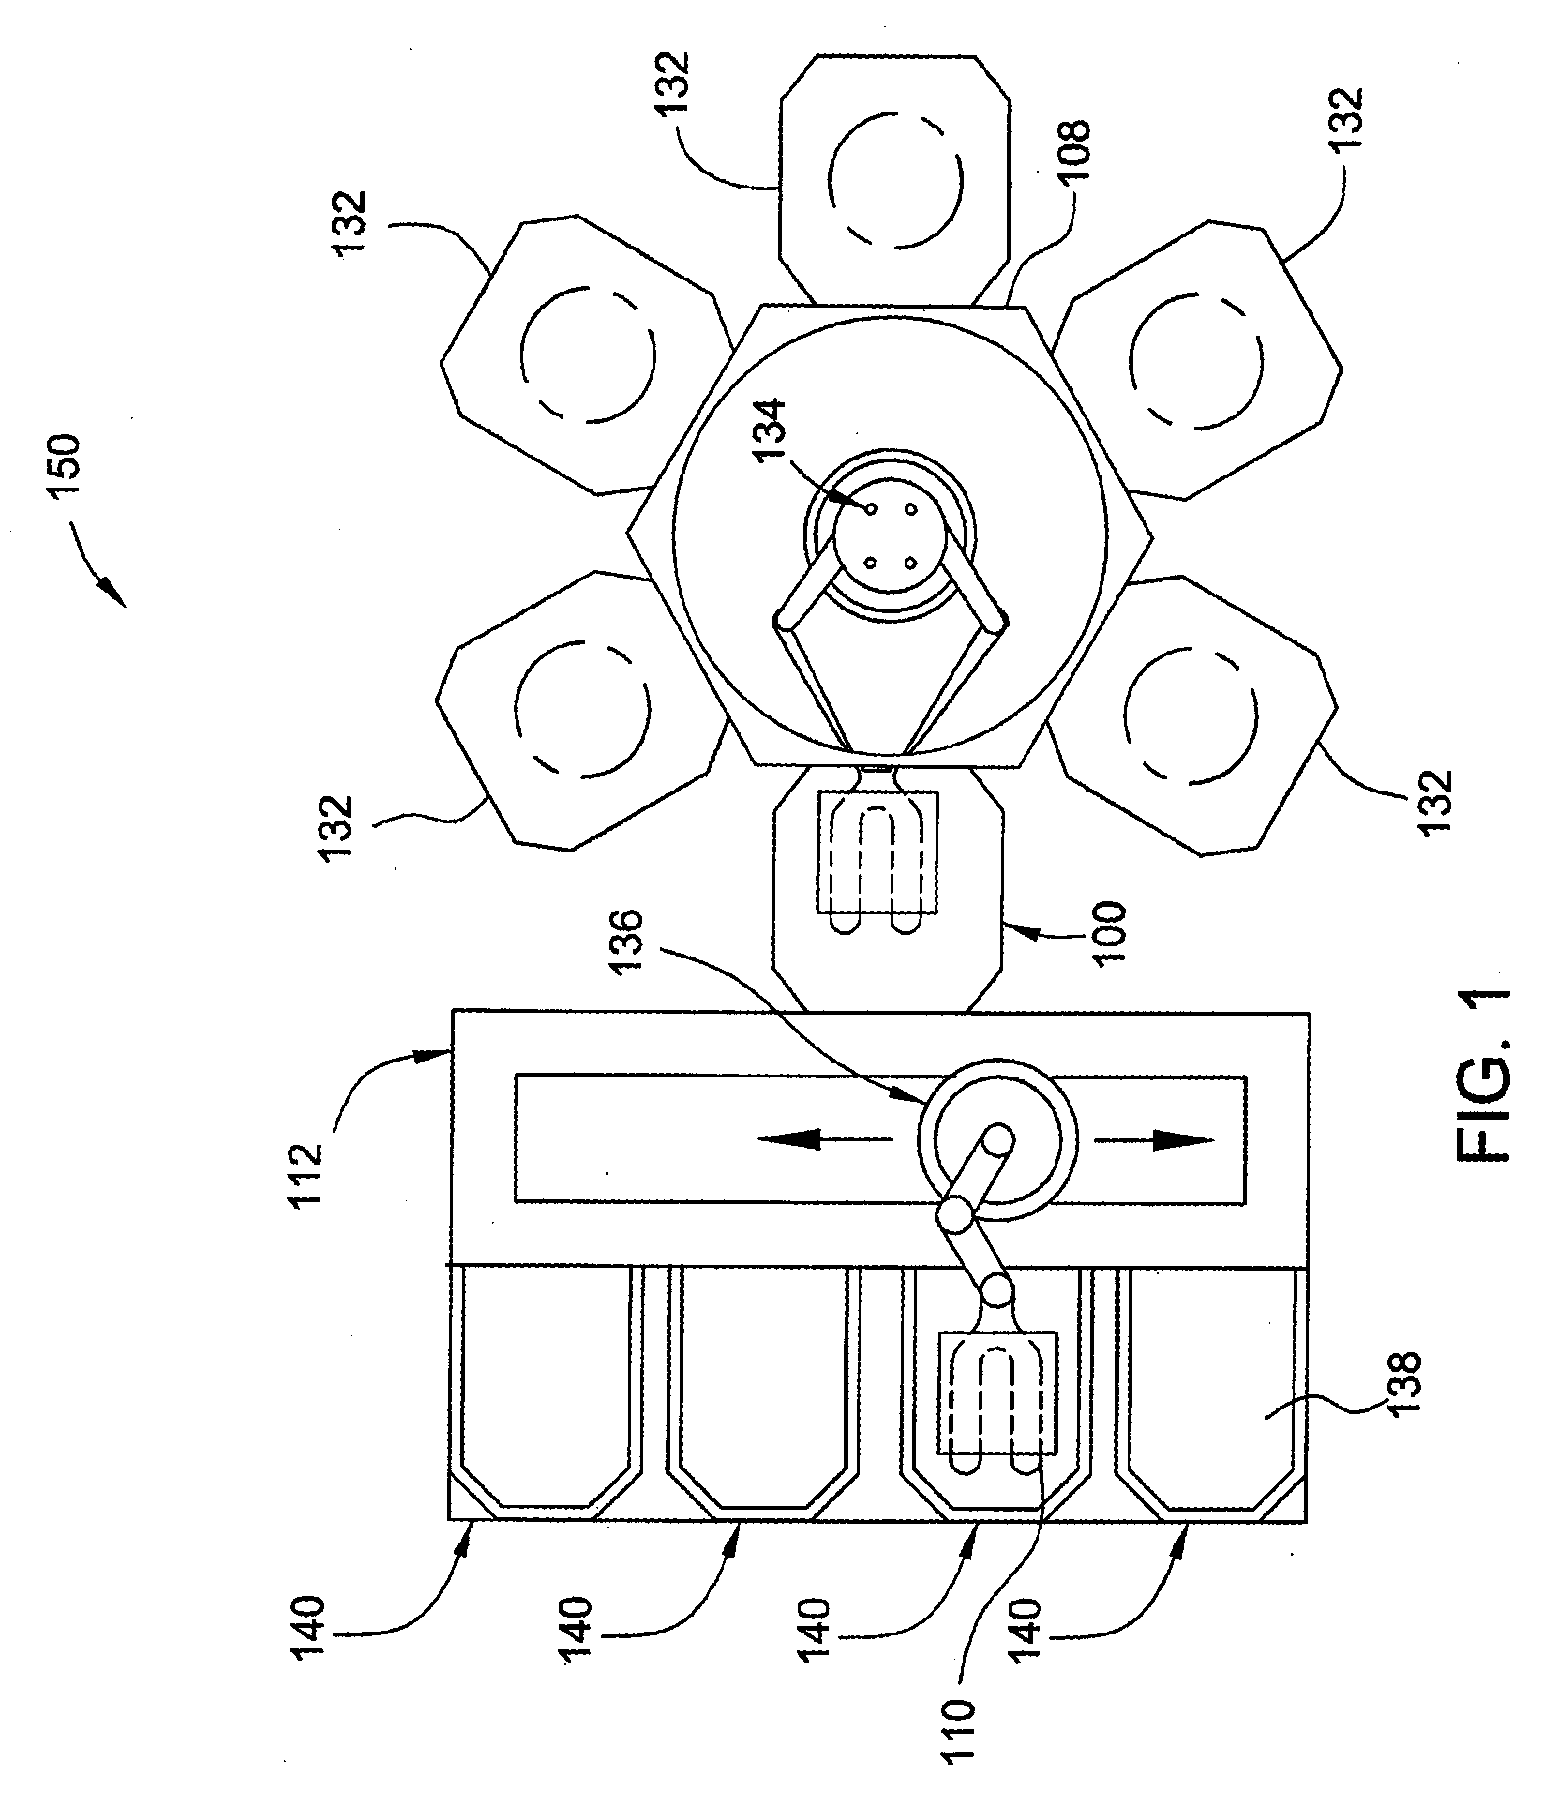 Large area substrate transferring method